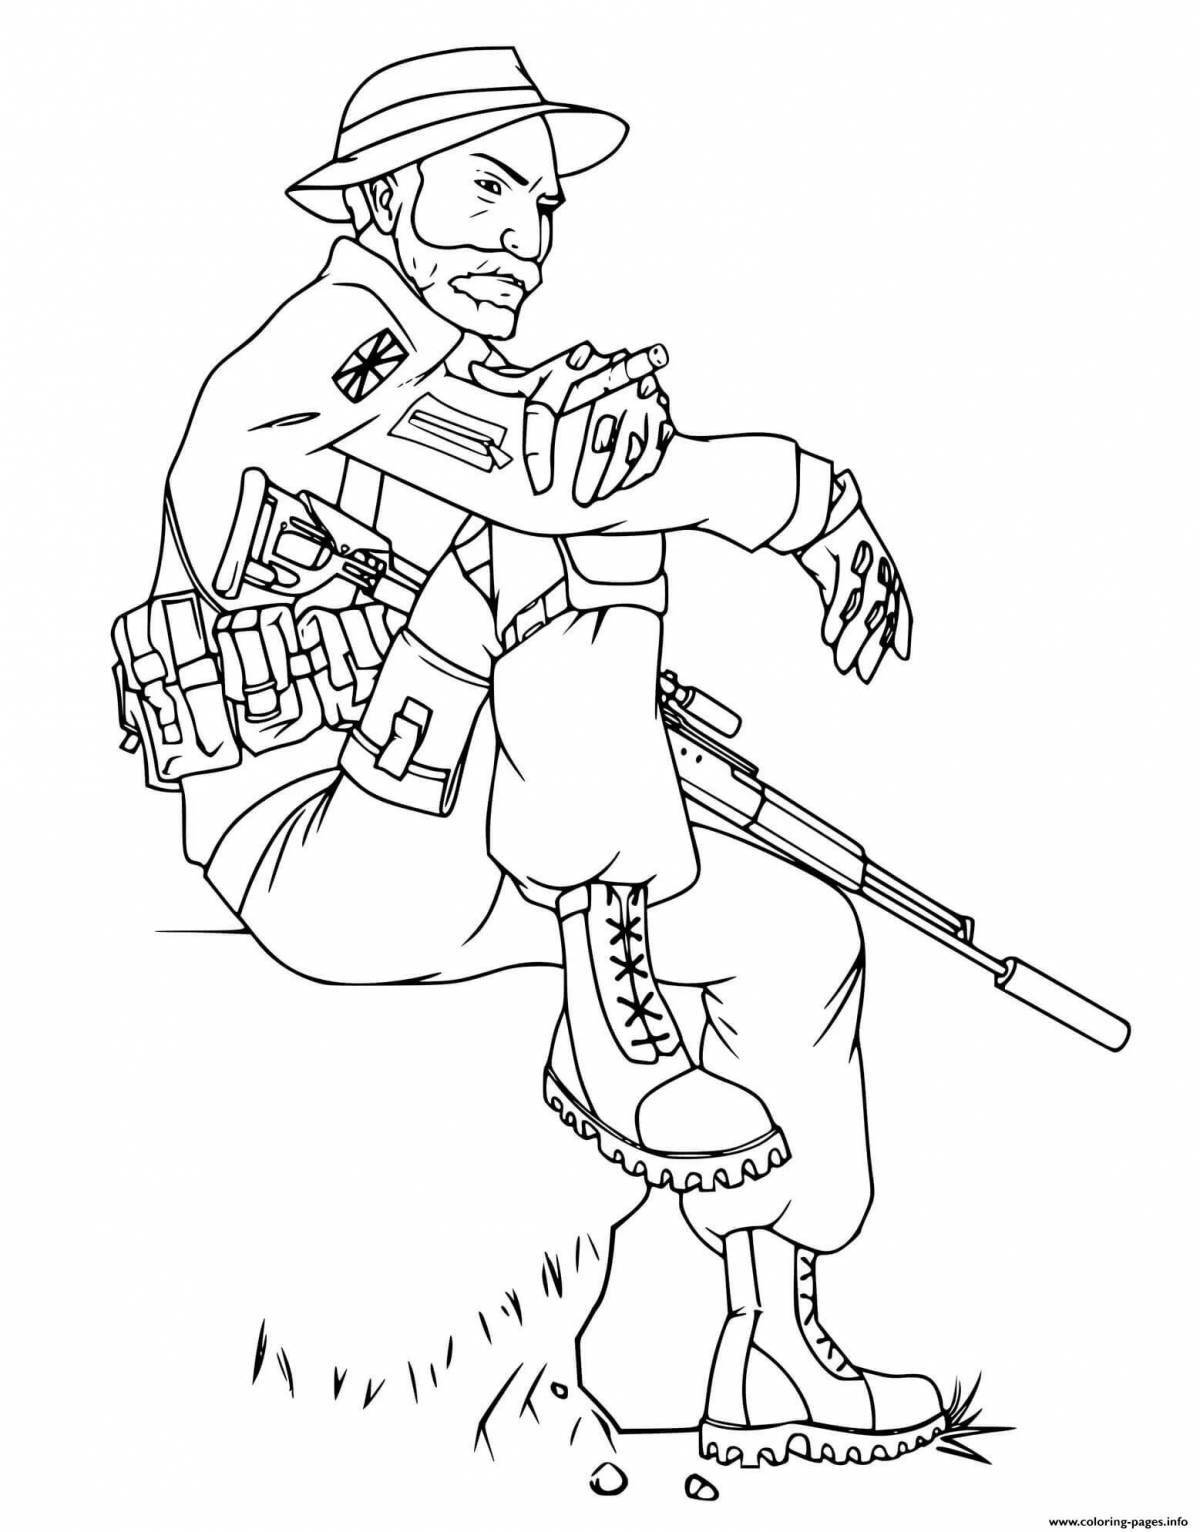 Coloring page strating feces duty